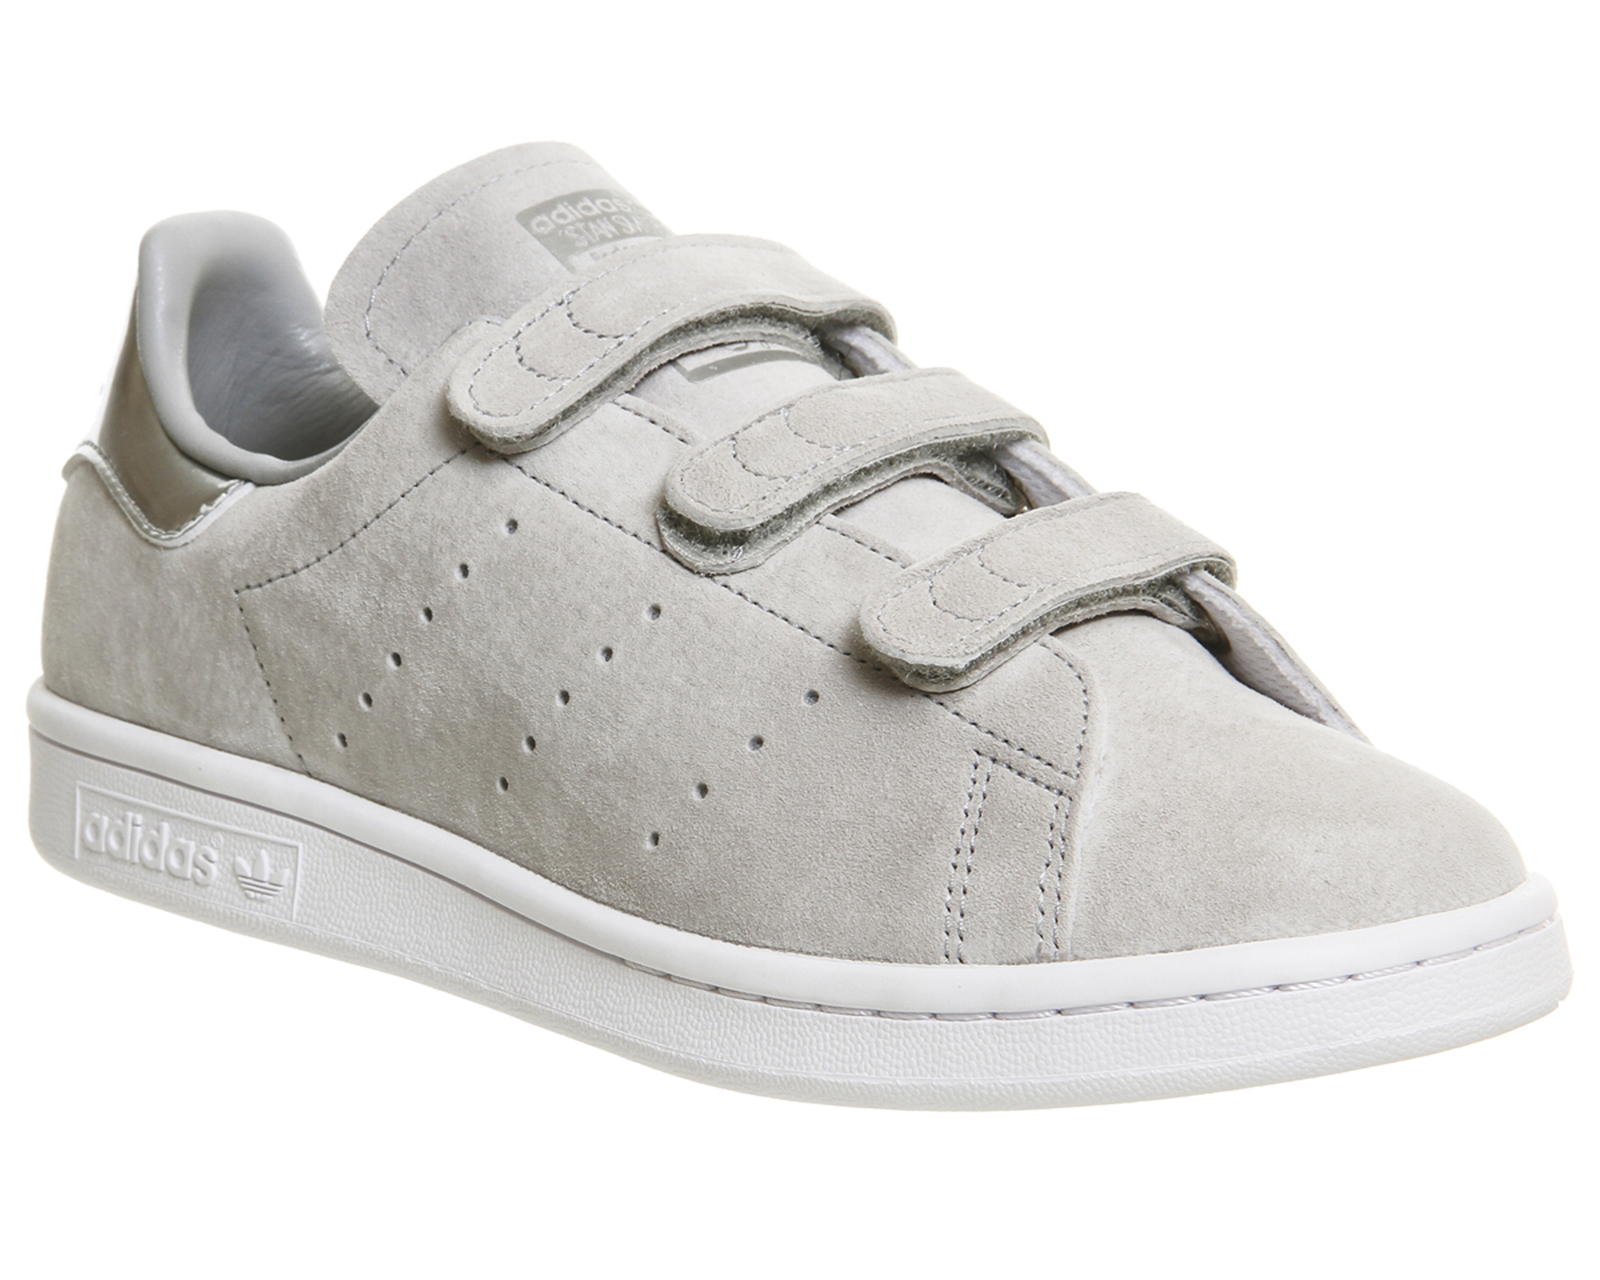 adidas Stan Smith Cf Trainers Clear Onix Silver - Women's Trainers